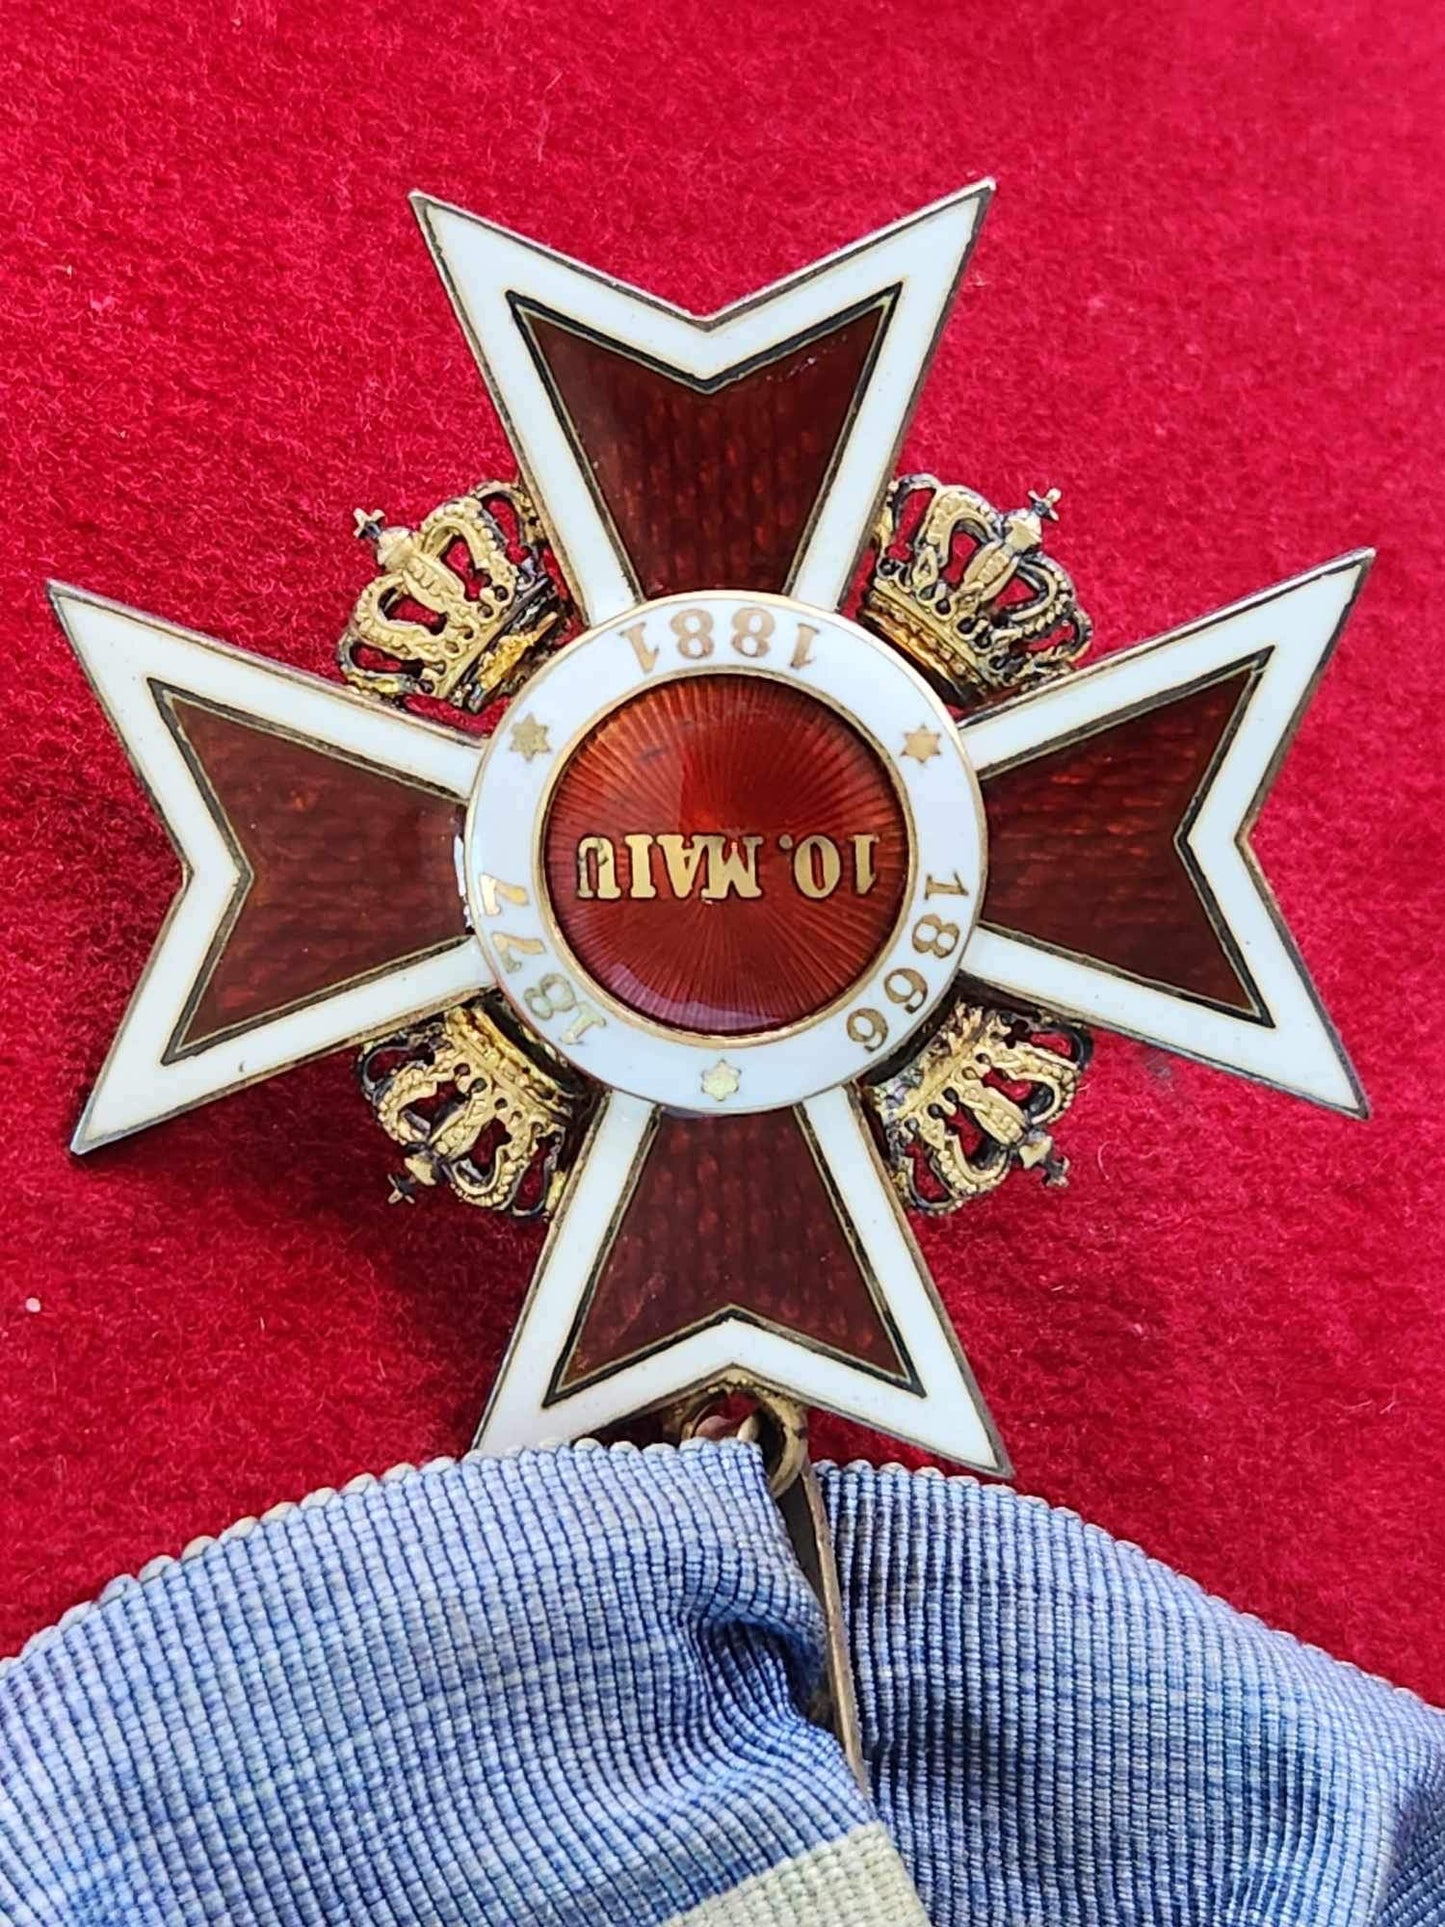 ROMANIA KINGDOM
ORDER OF THE CROWN WITHOUT SWORDS. CIVIL. GRAND OFFICER SET, NECK BADGE, AND BREAST STAR. Silver. Hallmarked
 Made by Weiss. RR! EF